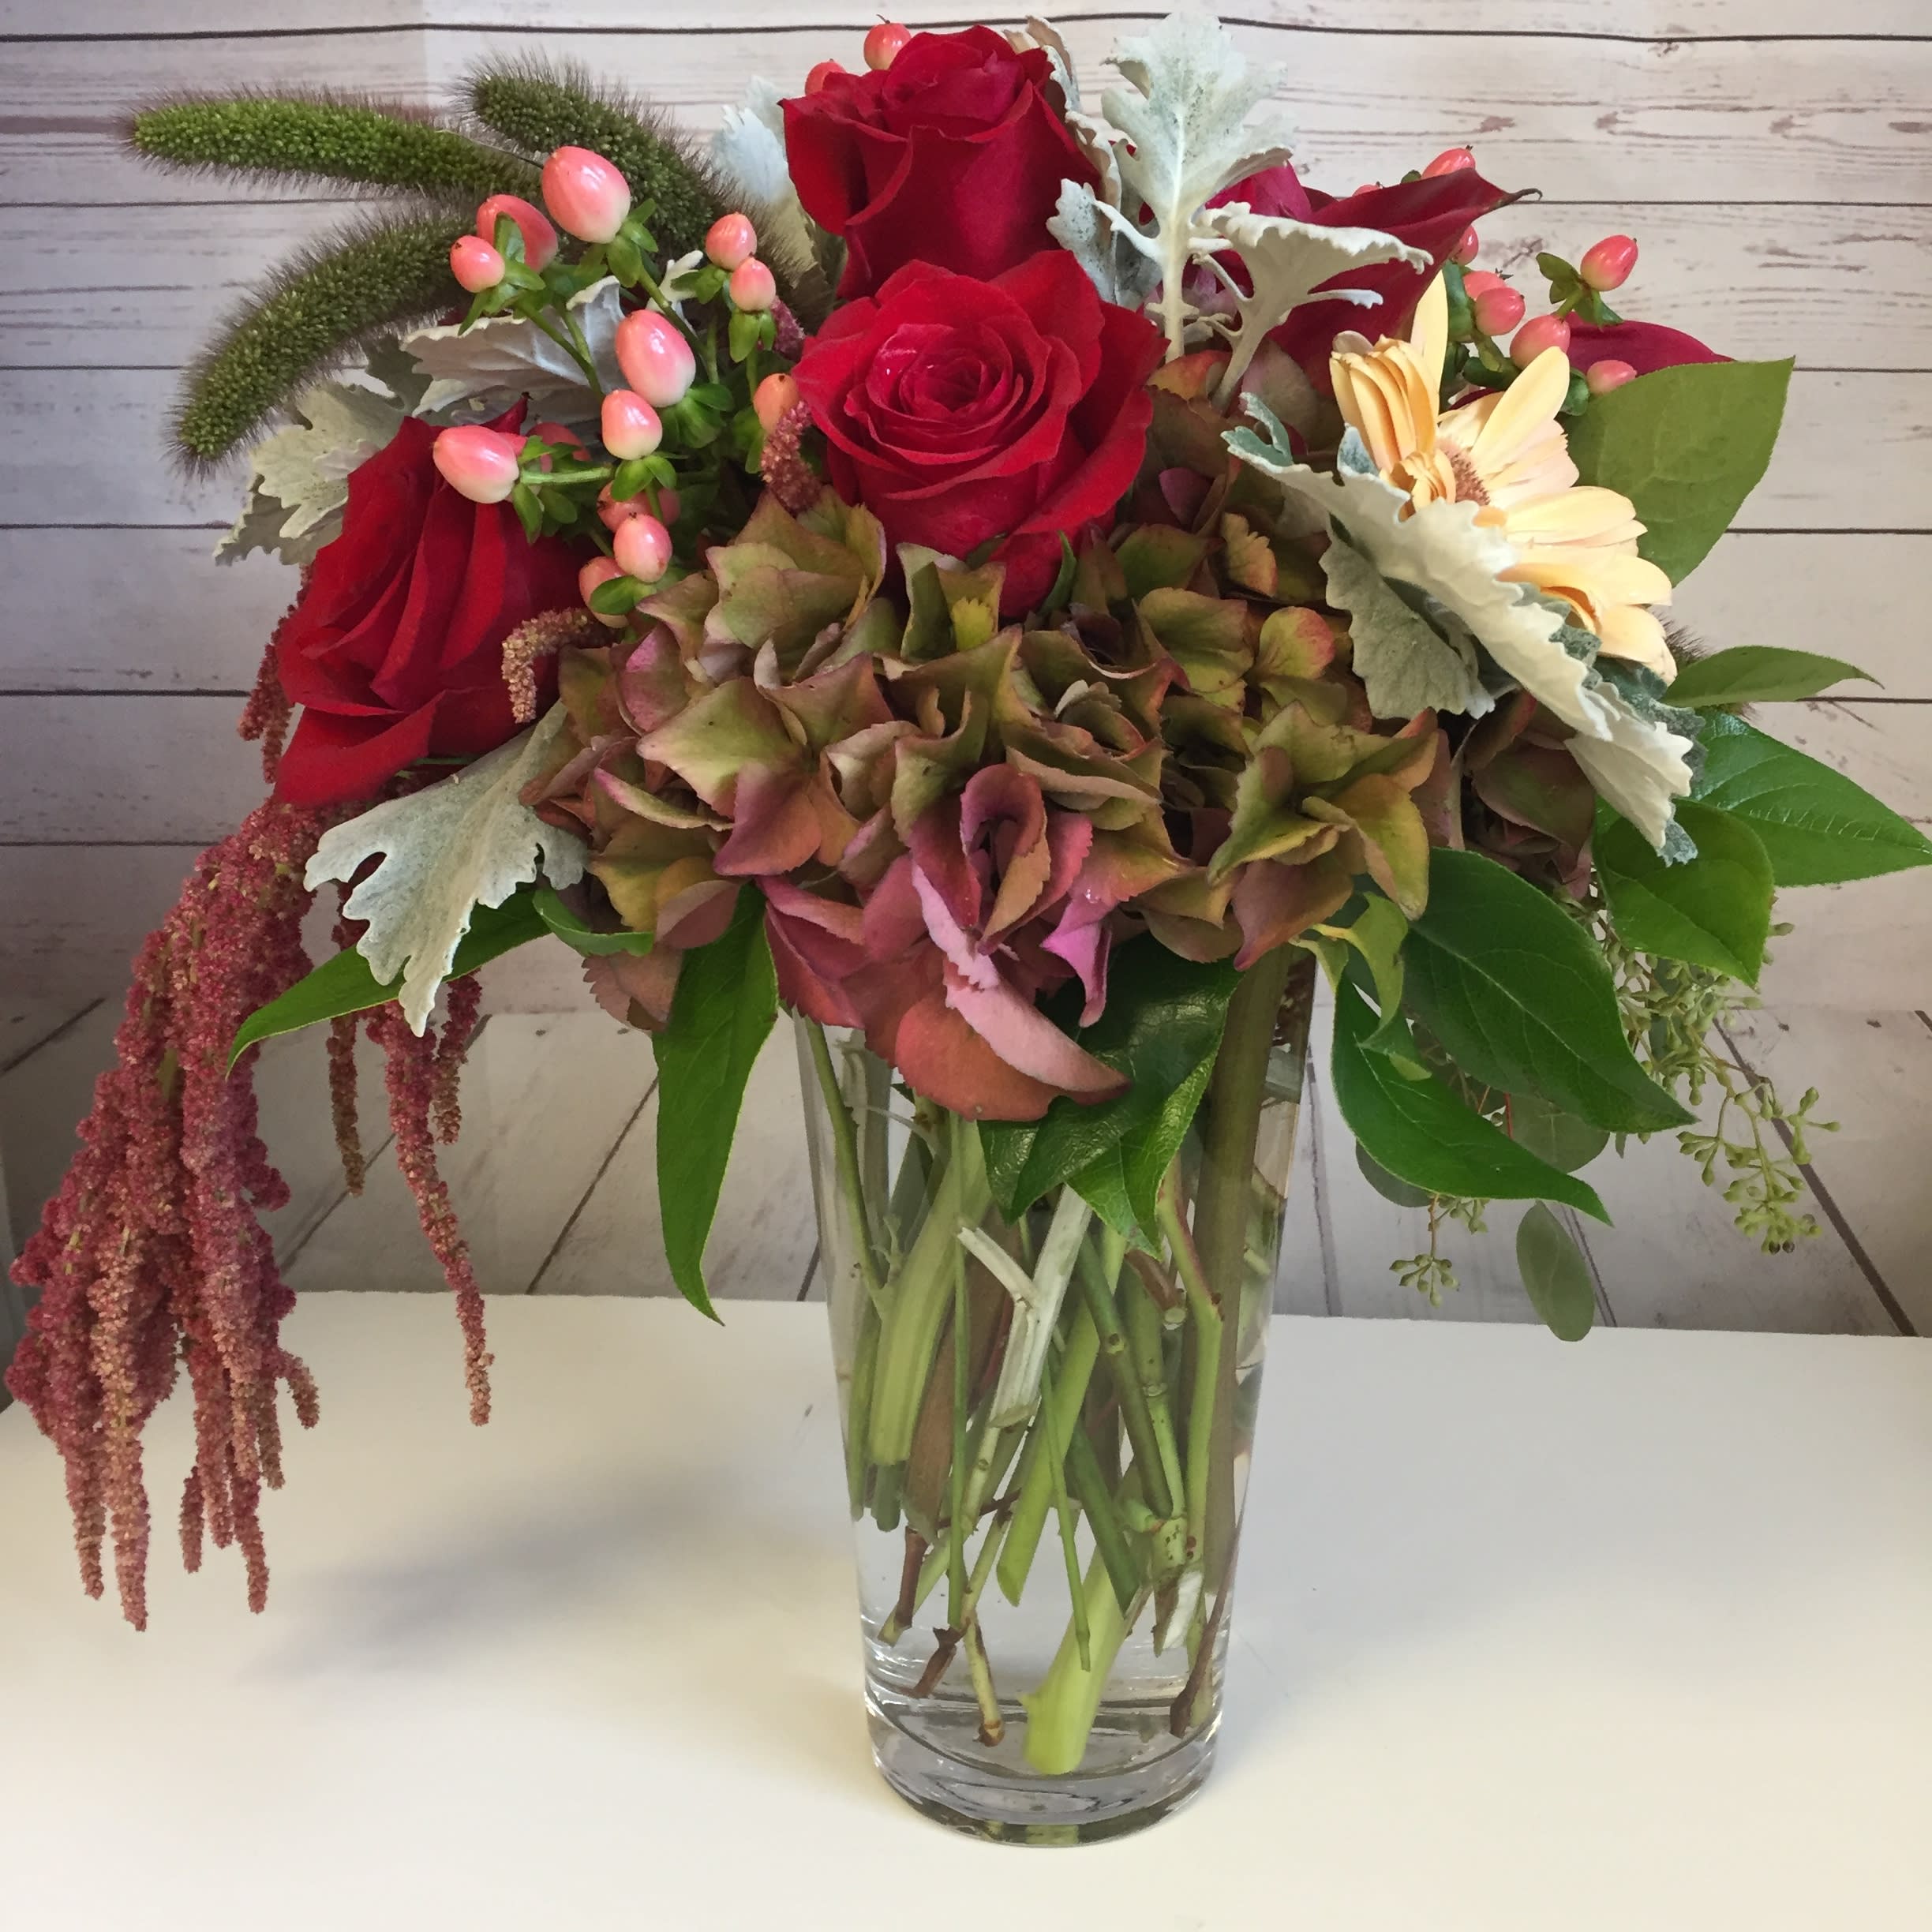 Red roses with Fall Accents - A fall arrangement with red roses and a selection of seasonal fall accents.  Individual accents will vary according to market.